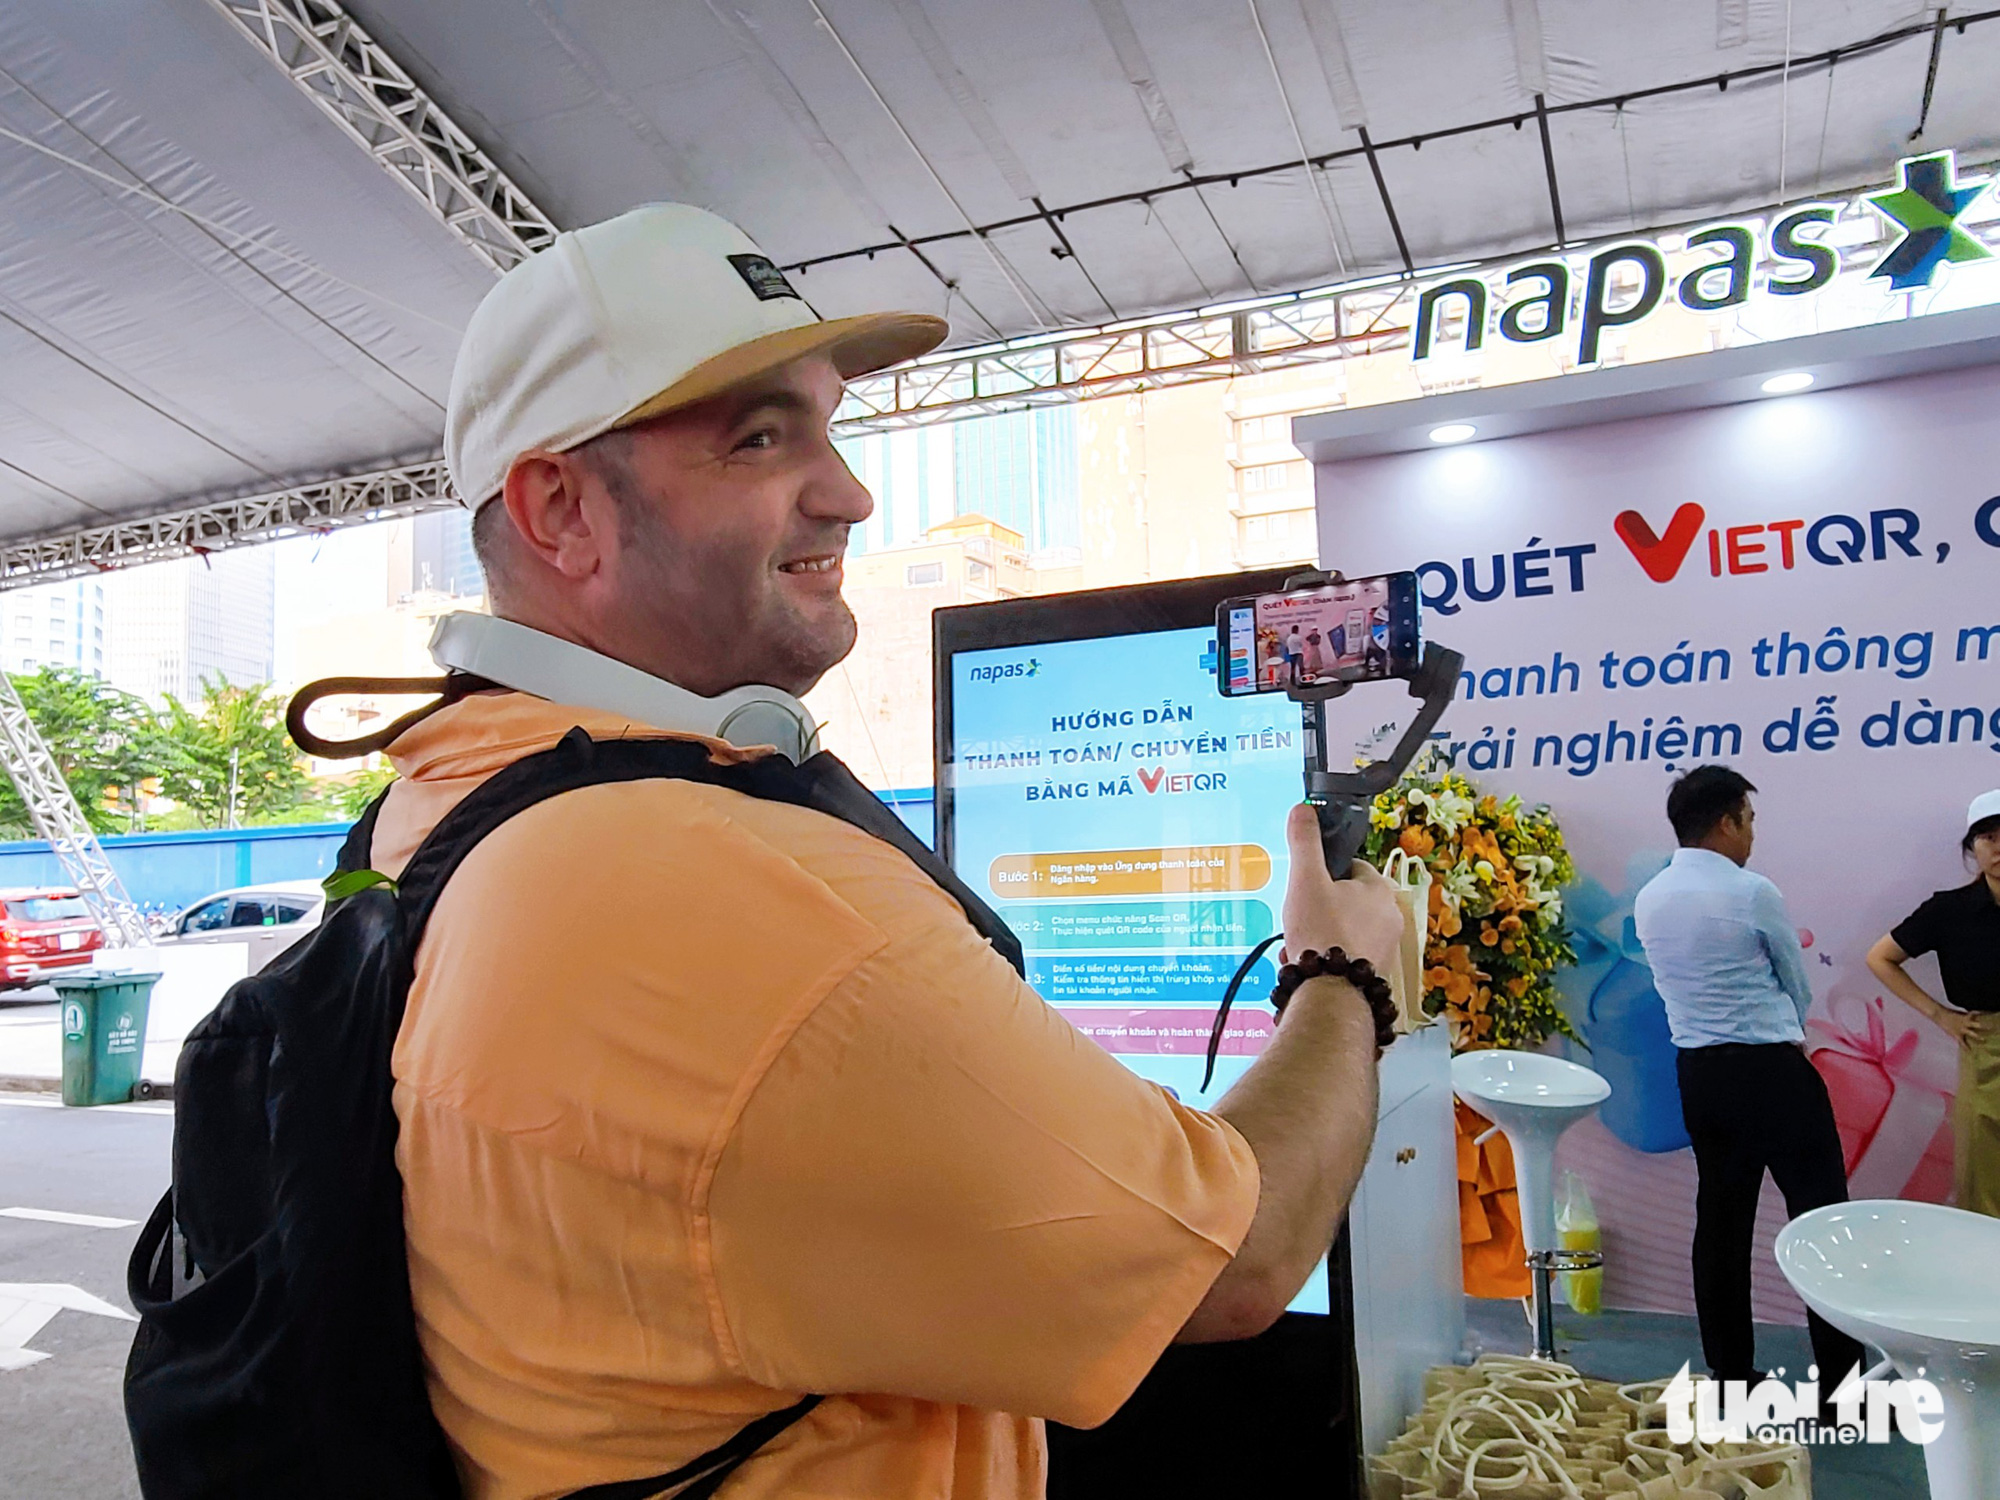 This image shows Chris, an American YouTuber, making a vlog to introduce the Cashless Festival that opened in Ho Chi Minh City on June 16, 2023. Photo: Nhat Xuan / Tuoi Tre